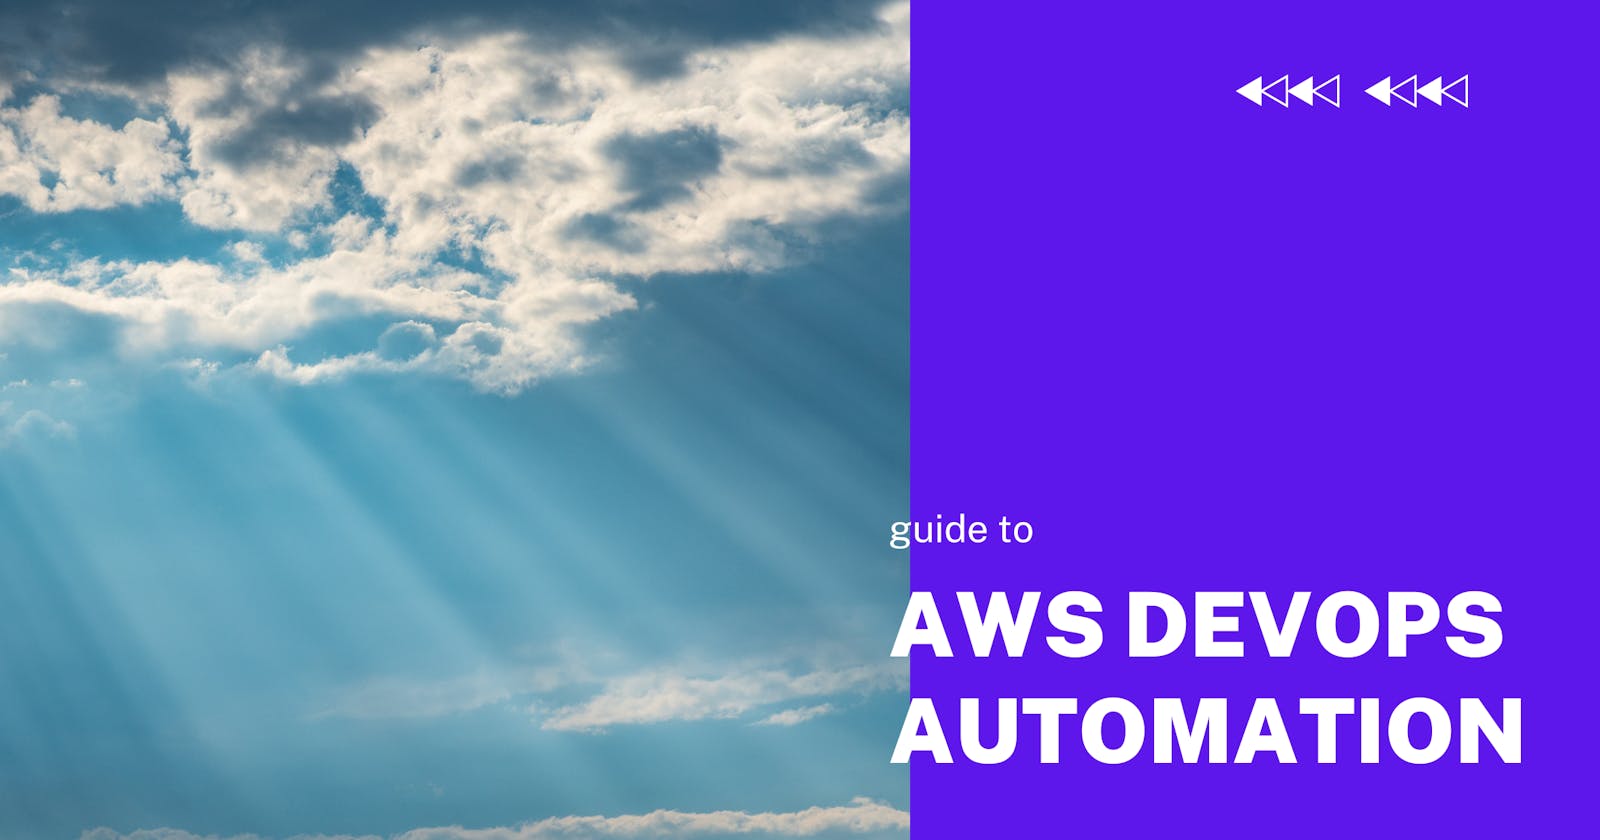 Guide to AWS DevOps Automation